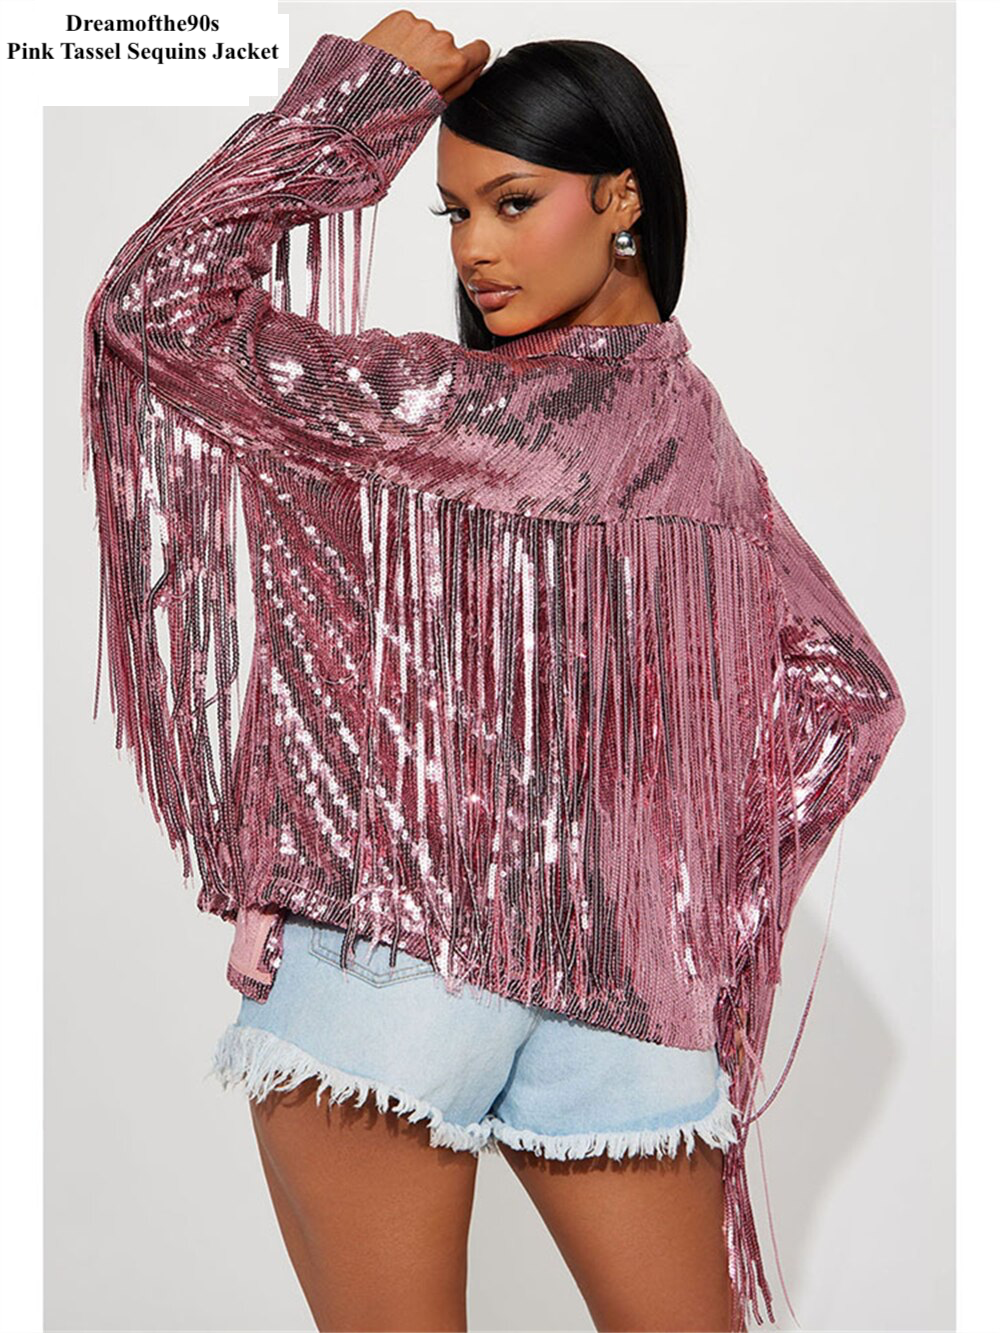 Tassel Sequins Jacket | Dreamofthe90s – The Dream Of The 90's Shoppe